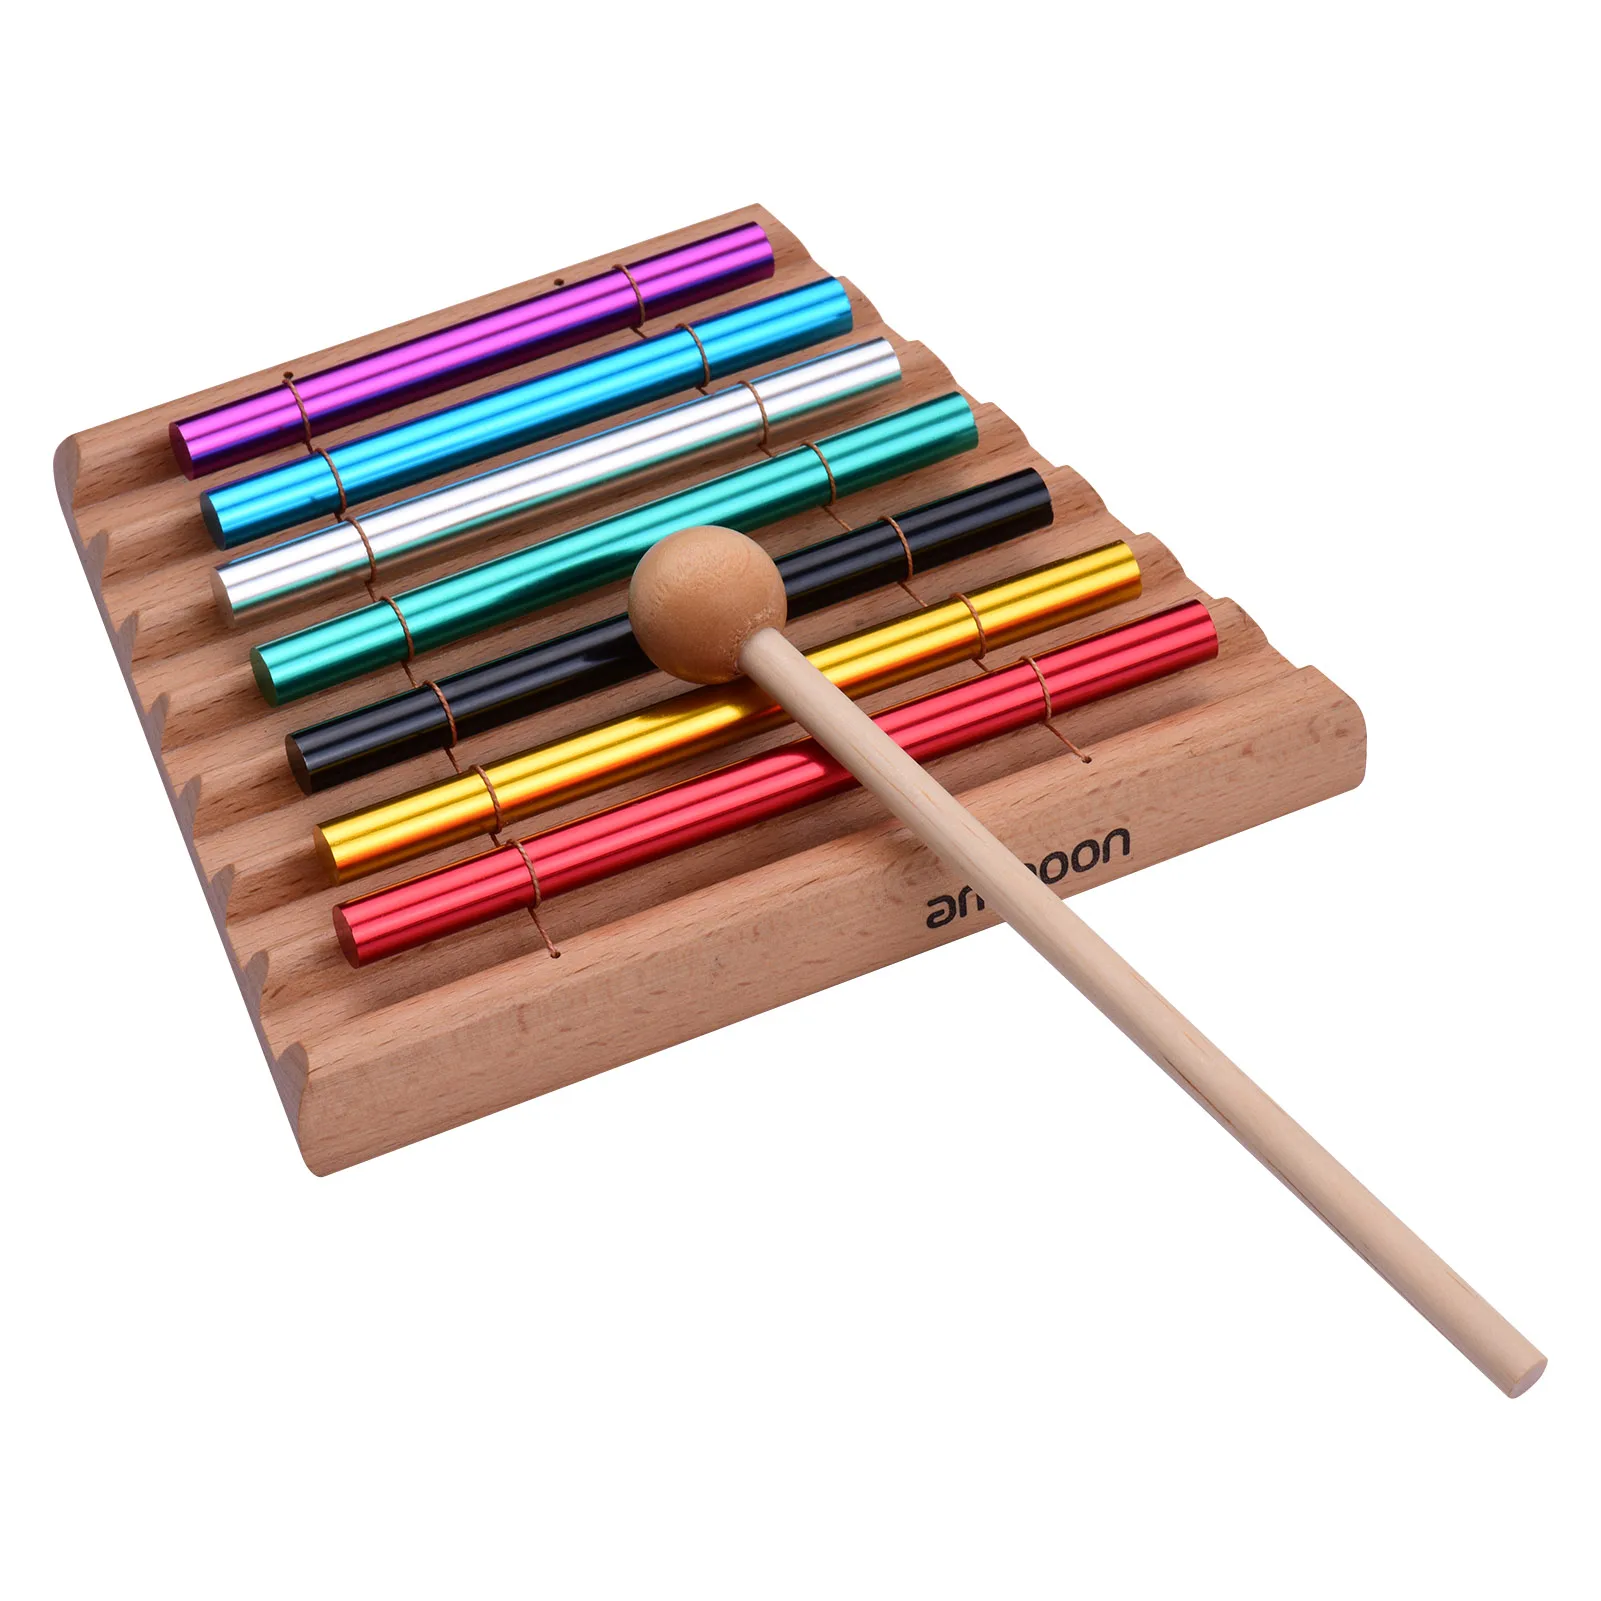 Teachers Classroom Reminder Bell Meditation Chimes Solo Percussion Instrument Musical Chime Toys for Children Pengxiaomei Solo Percussion Instrument 